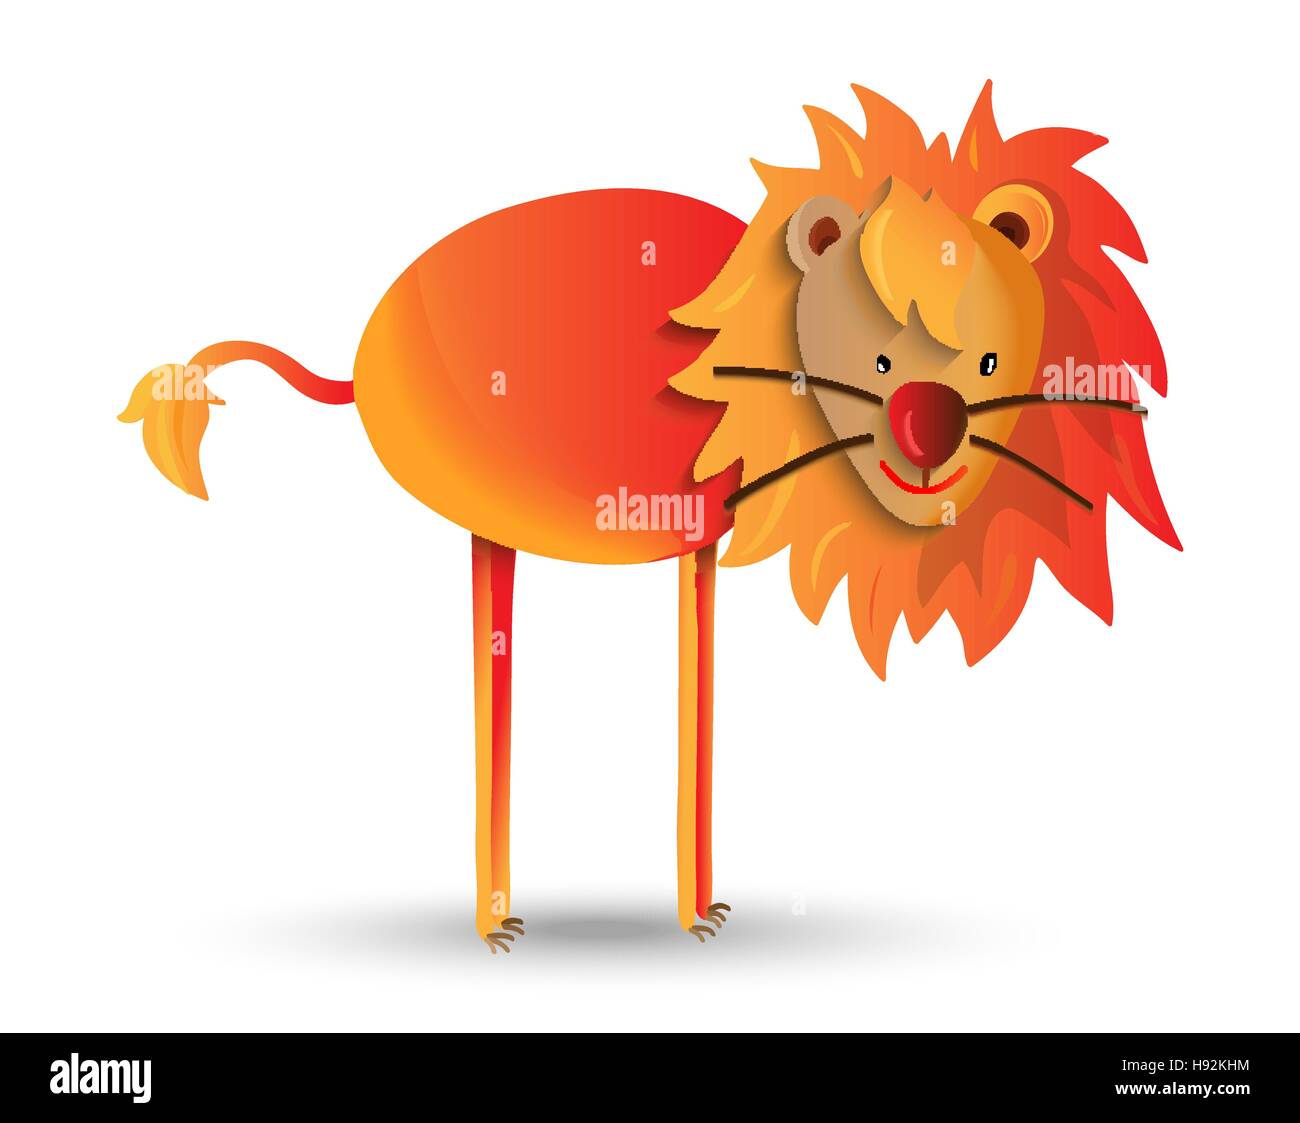 Cute wild animal cartoon illustration, happy jungle lion with mane. Ideal for children or education projects. EPS10 vector. Stock Vector